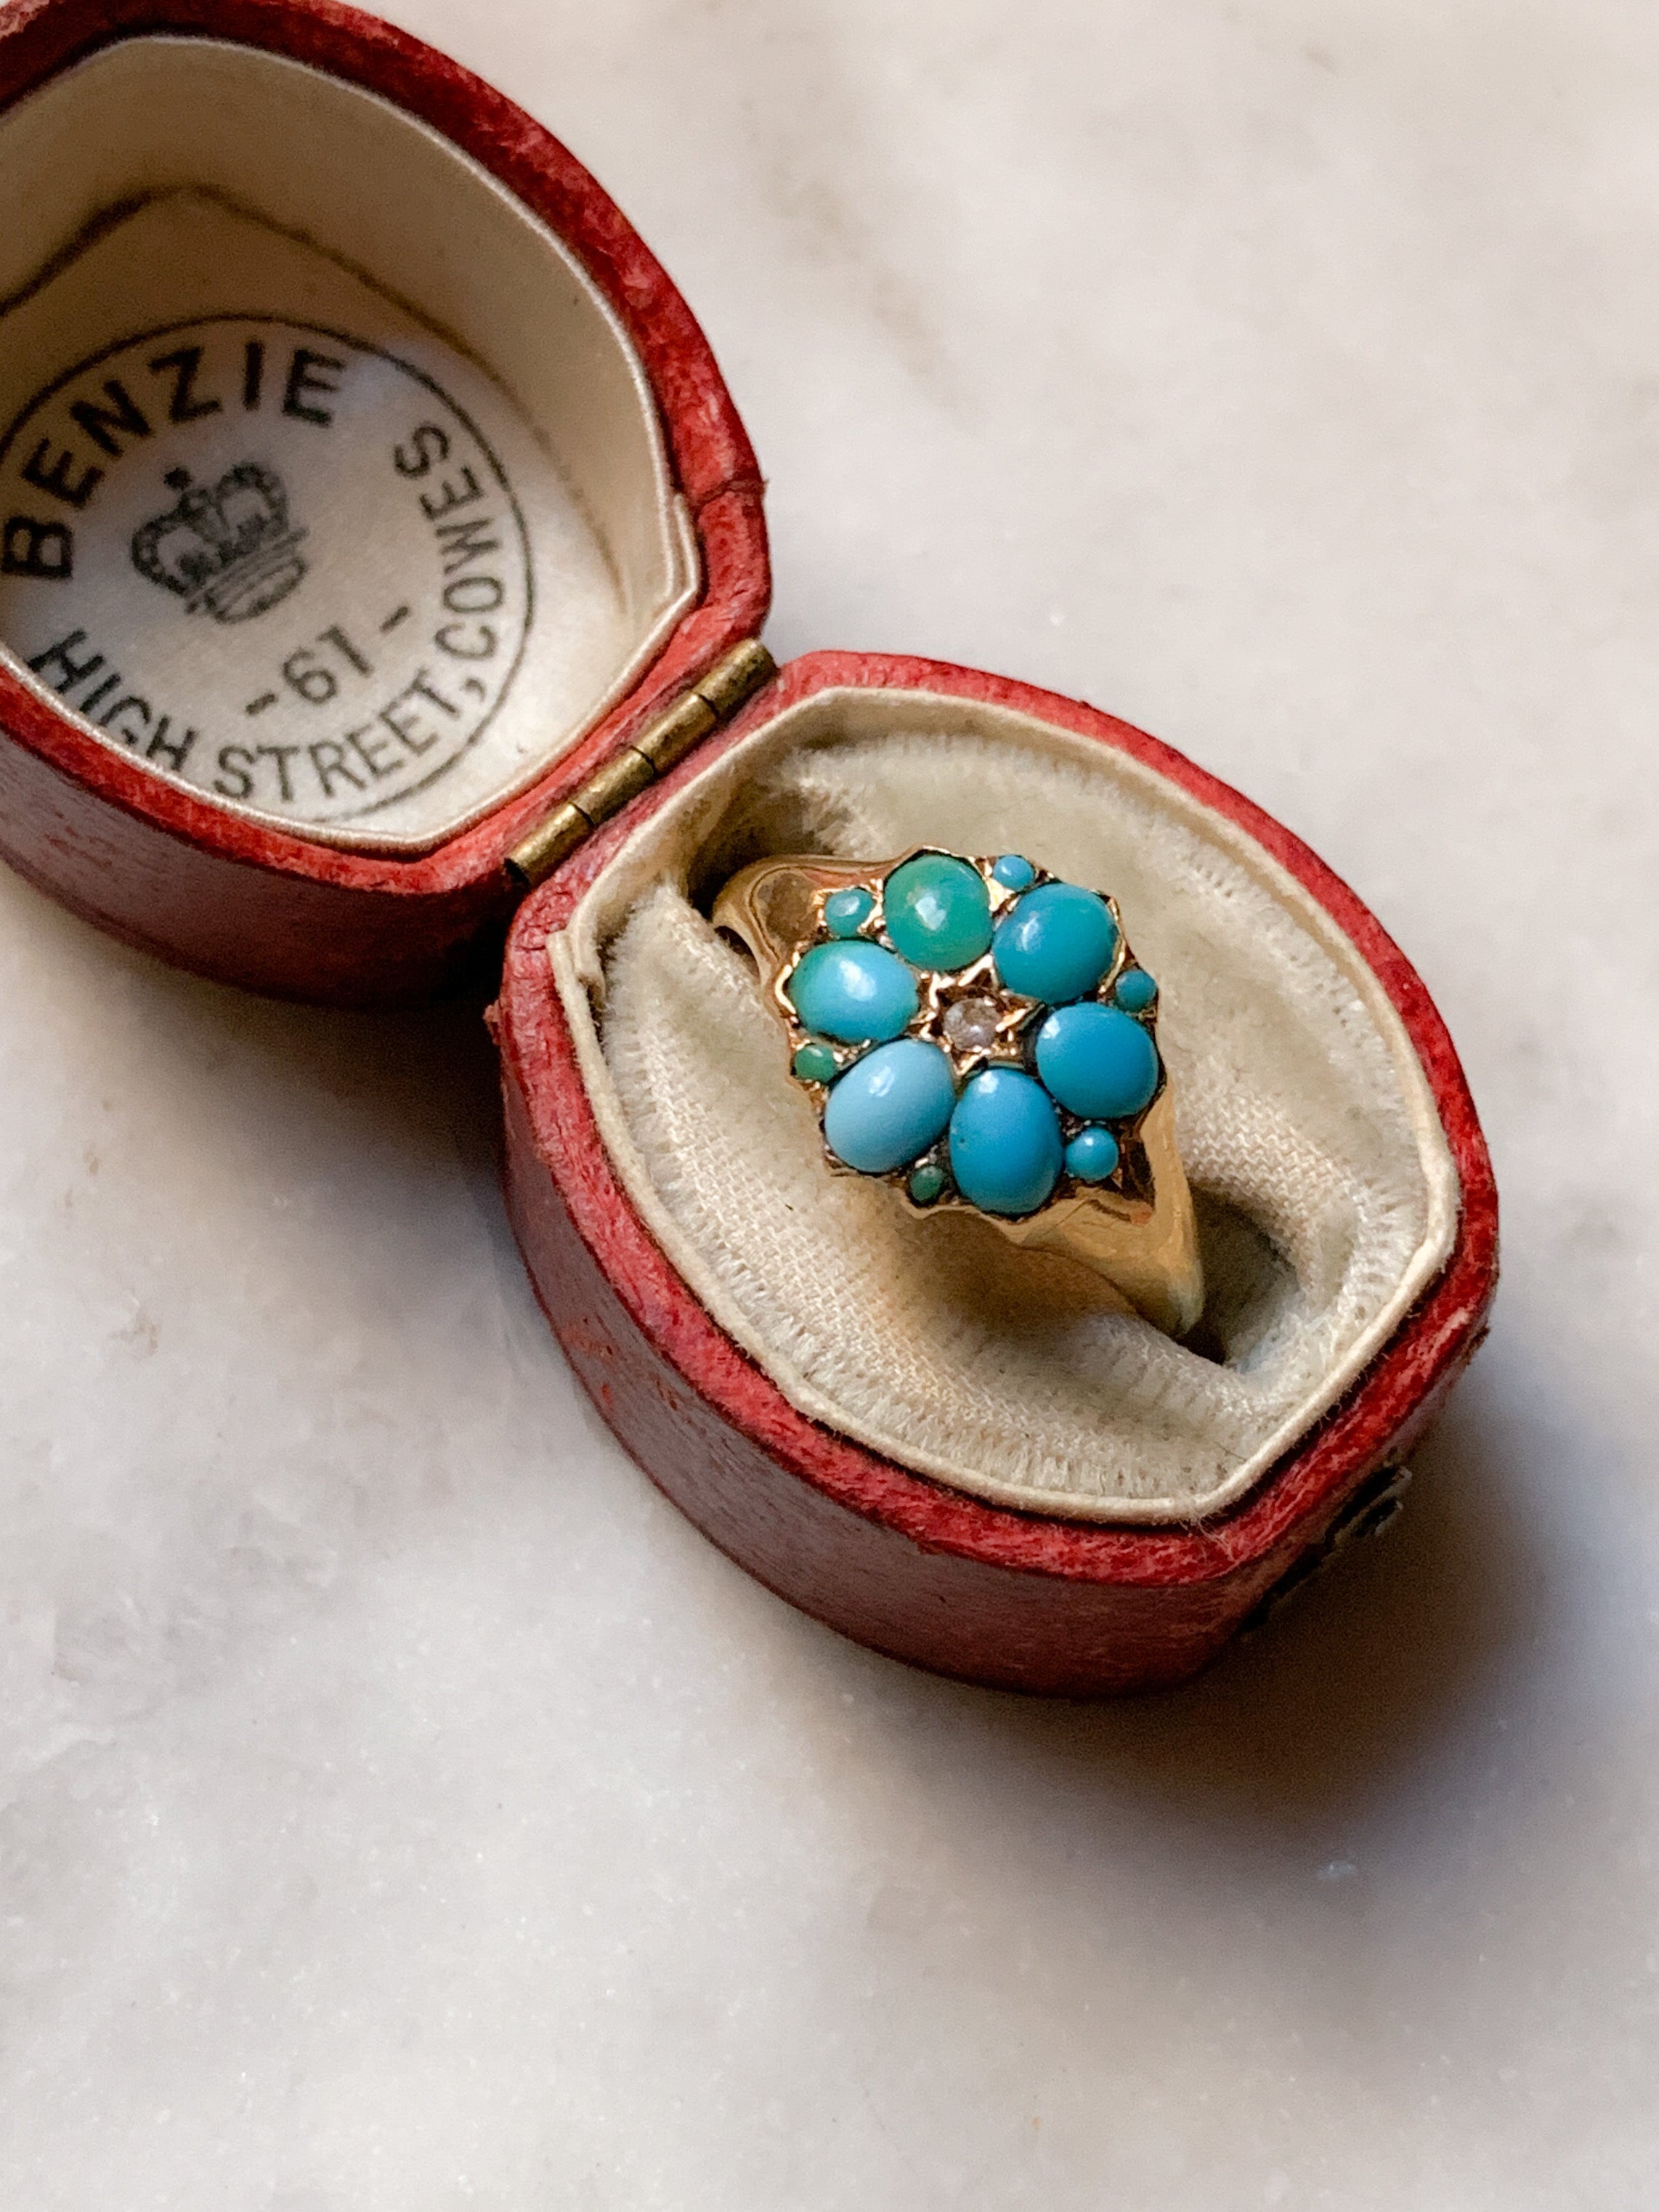 Stunning 15k Forget-Me-Not Turquoise and Diamond Ring